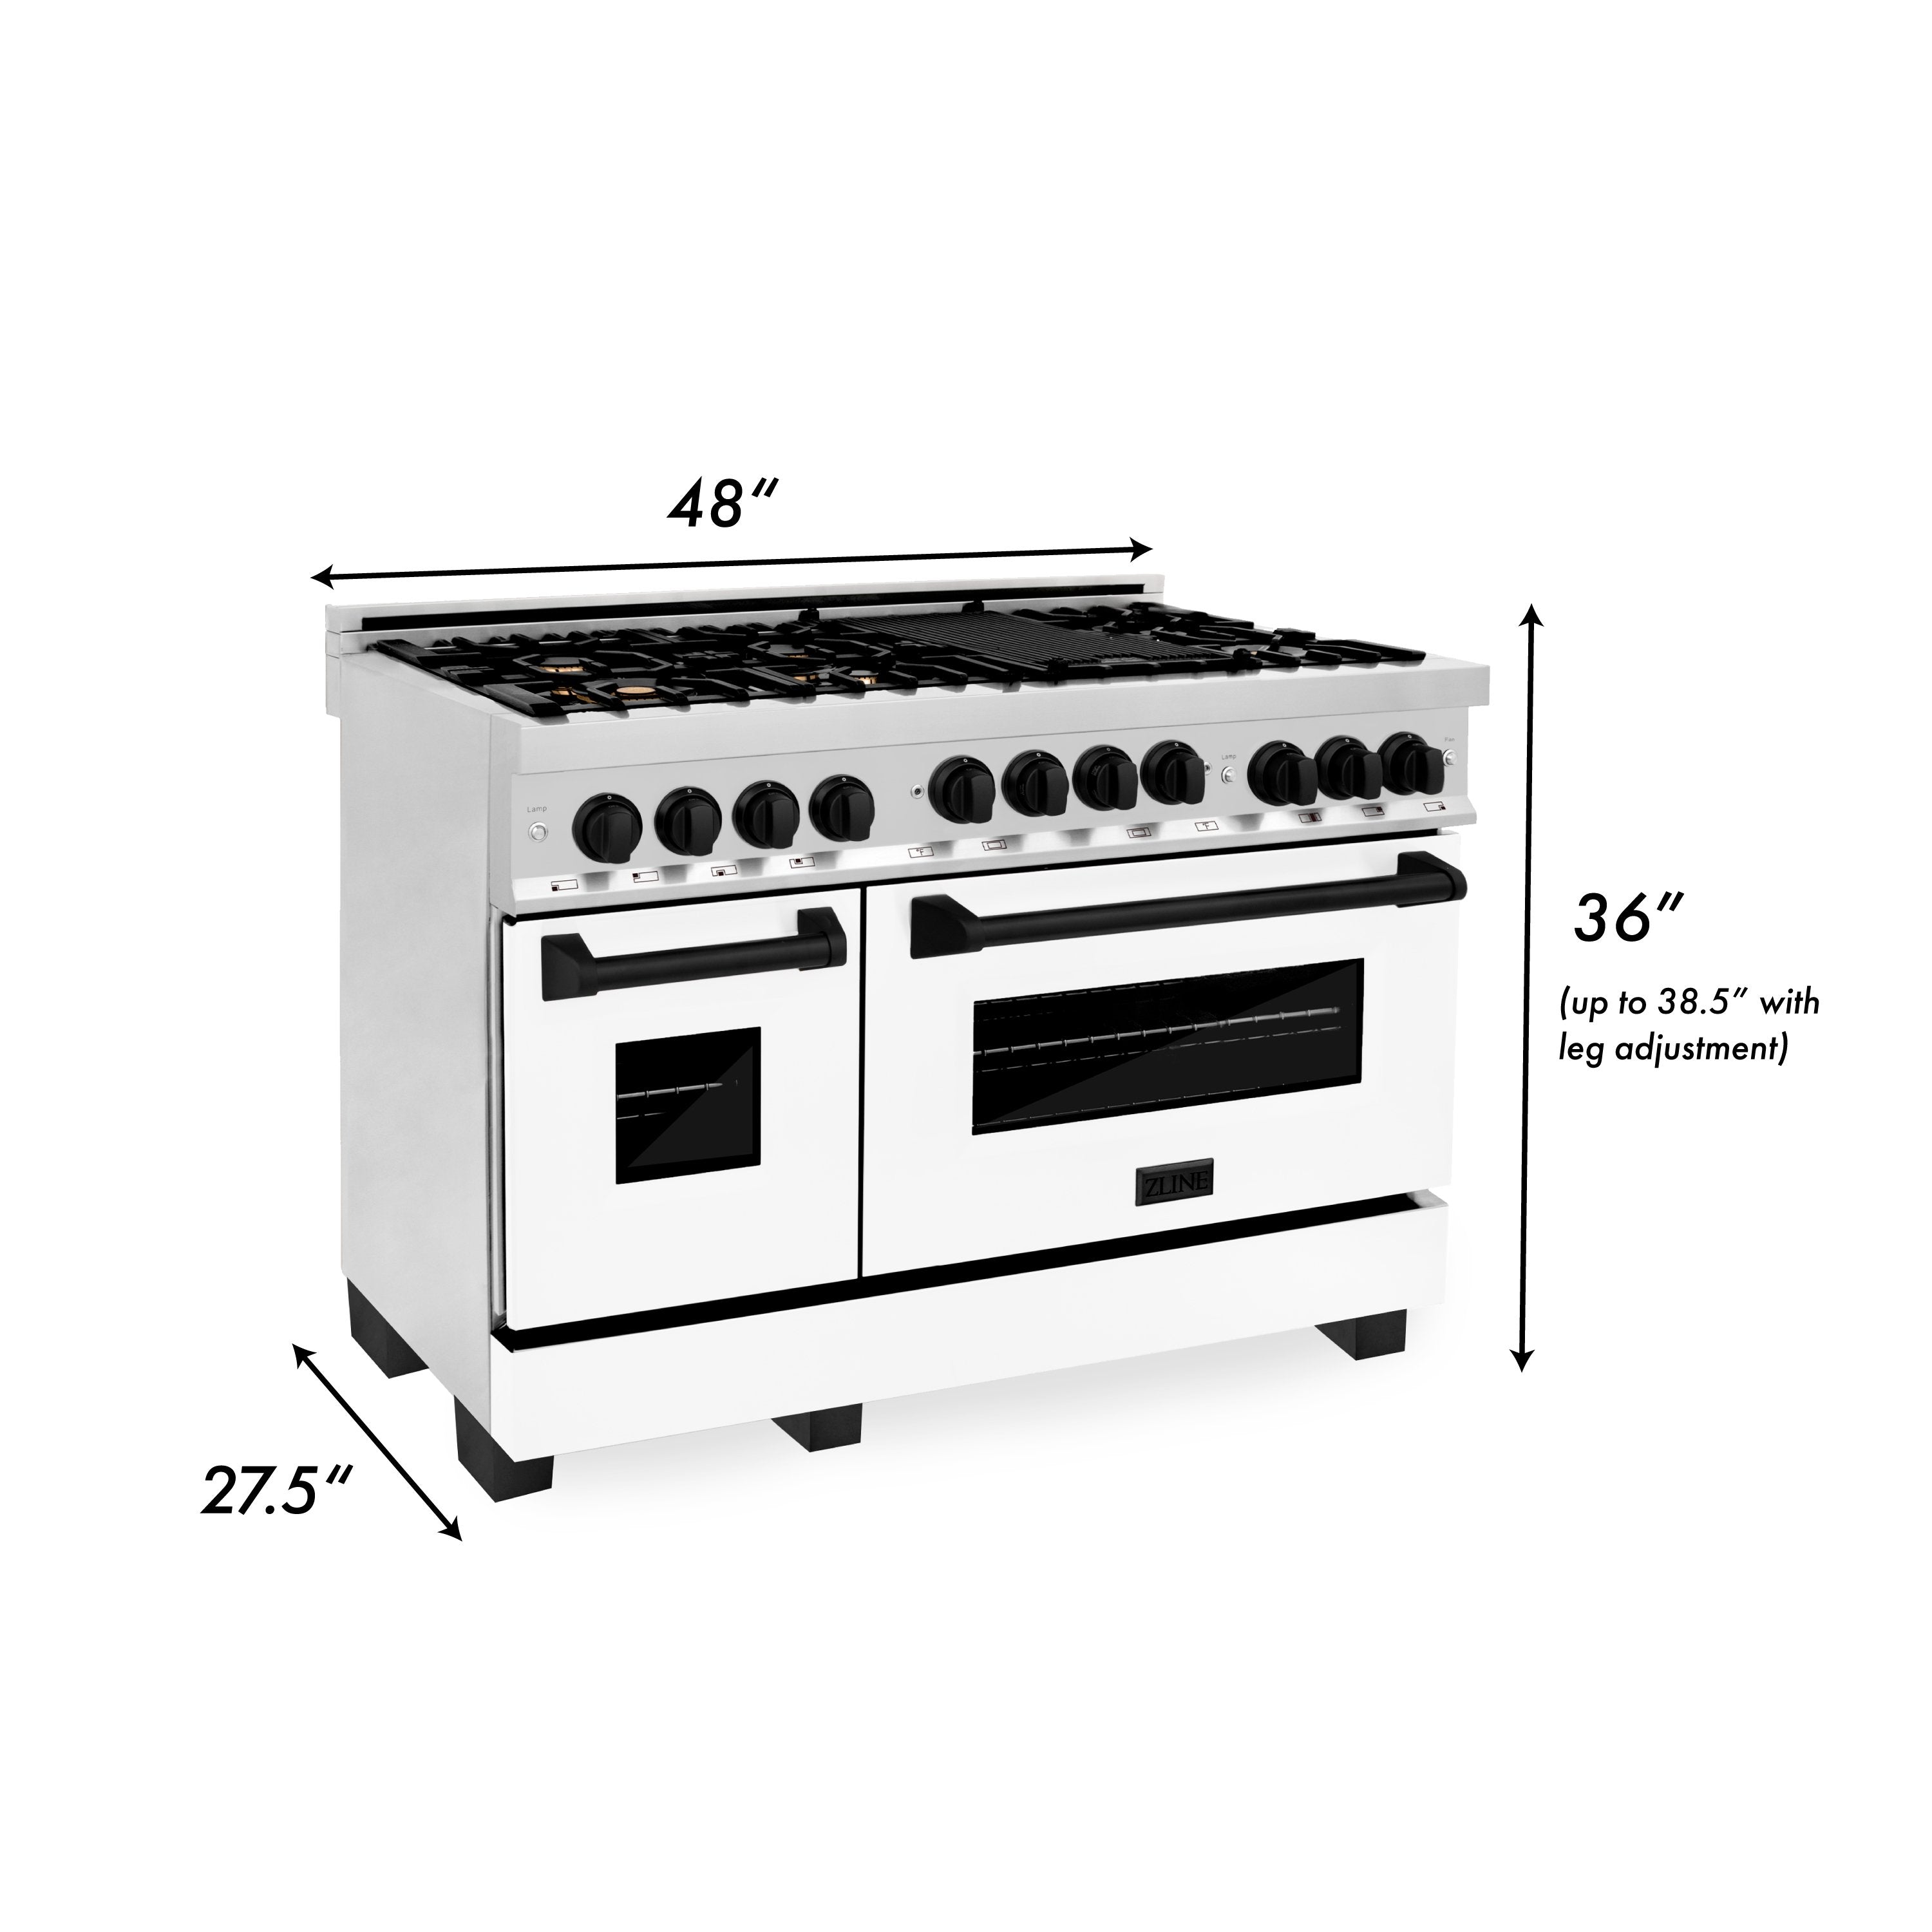 ZLINE Autograph Edition 48 in. 6.0 cu. ft. Range with Gas Stove and Gas Oven in Stainless Steel with White Matte Door with Accents (RGZ-WM-48)